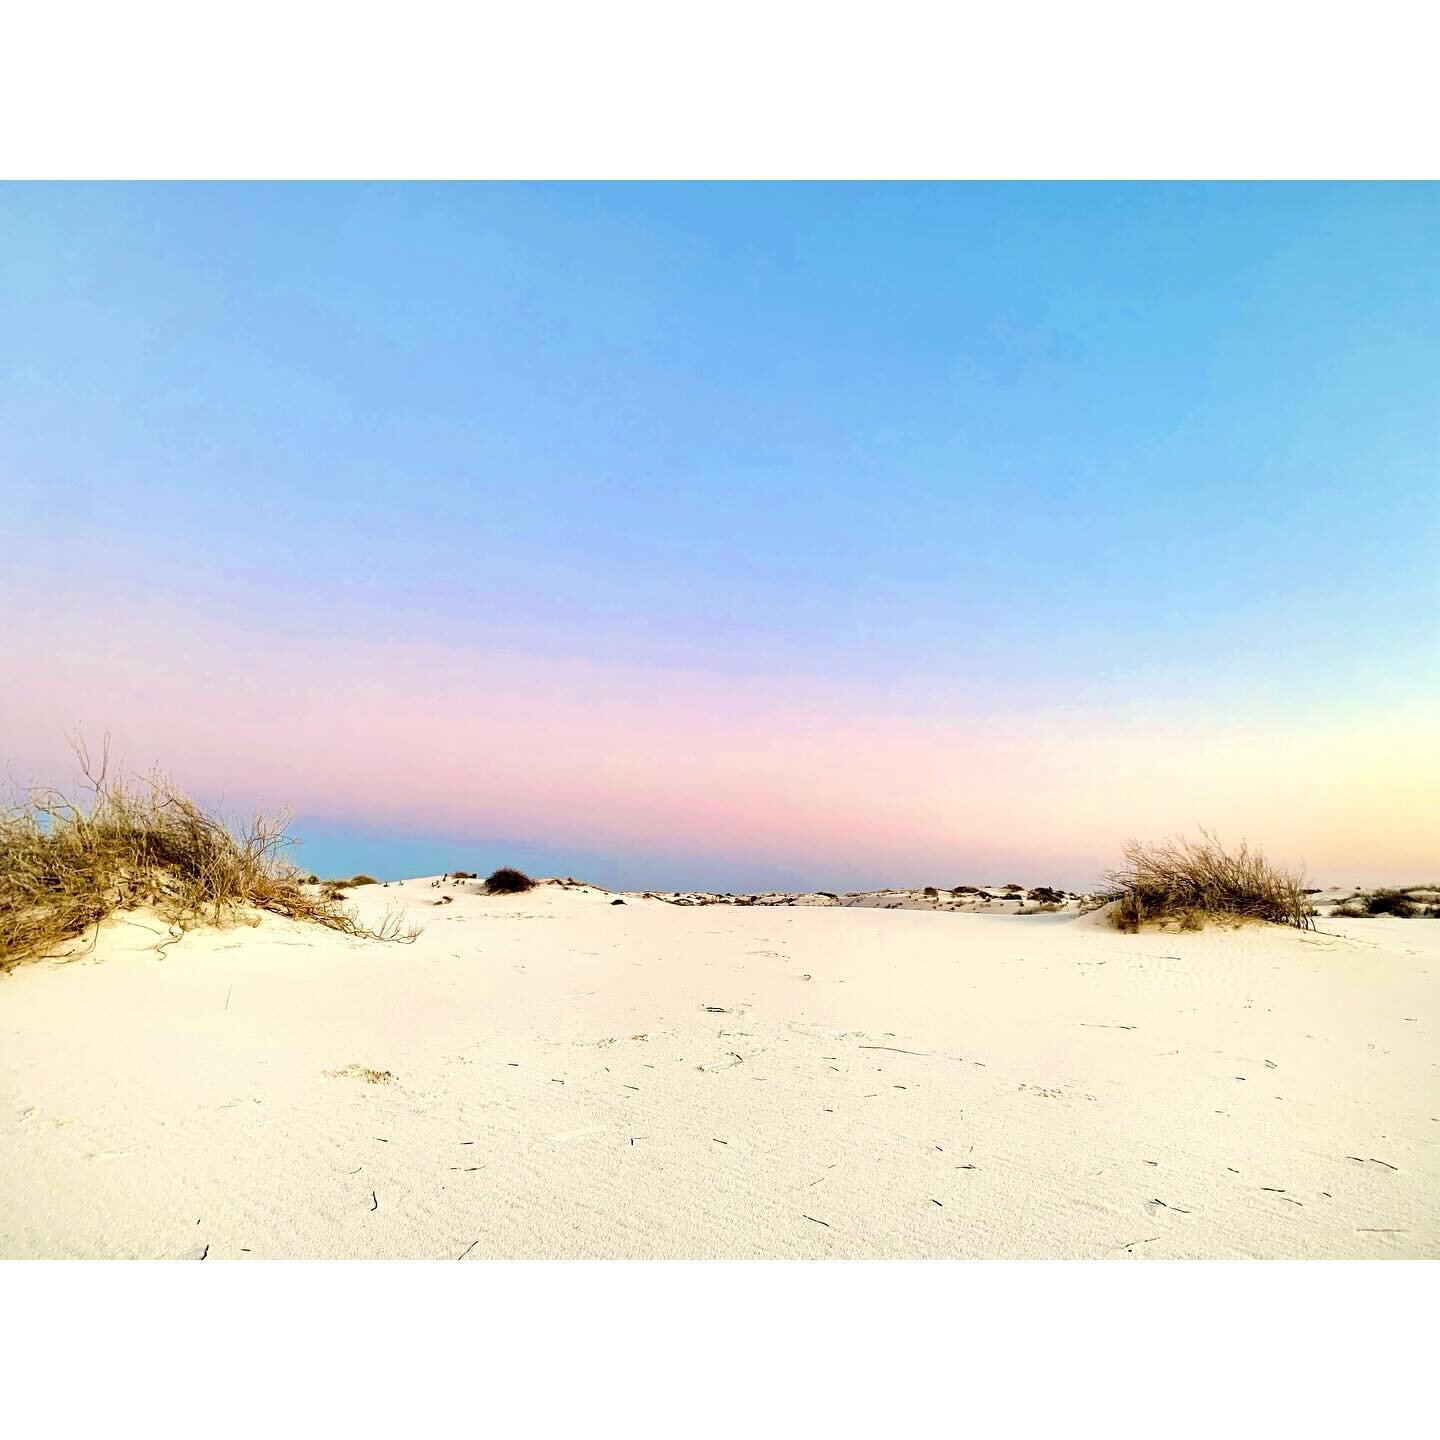 The last embers of the sun paint the White Sands a breathtaking pink. The sky puts on one final show, then fades to quiet, leaving an almost reverent stillness. This place is magic. #WhiteSandsNationalPark #NewMexico #Sunset #serenity